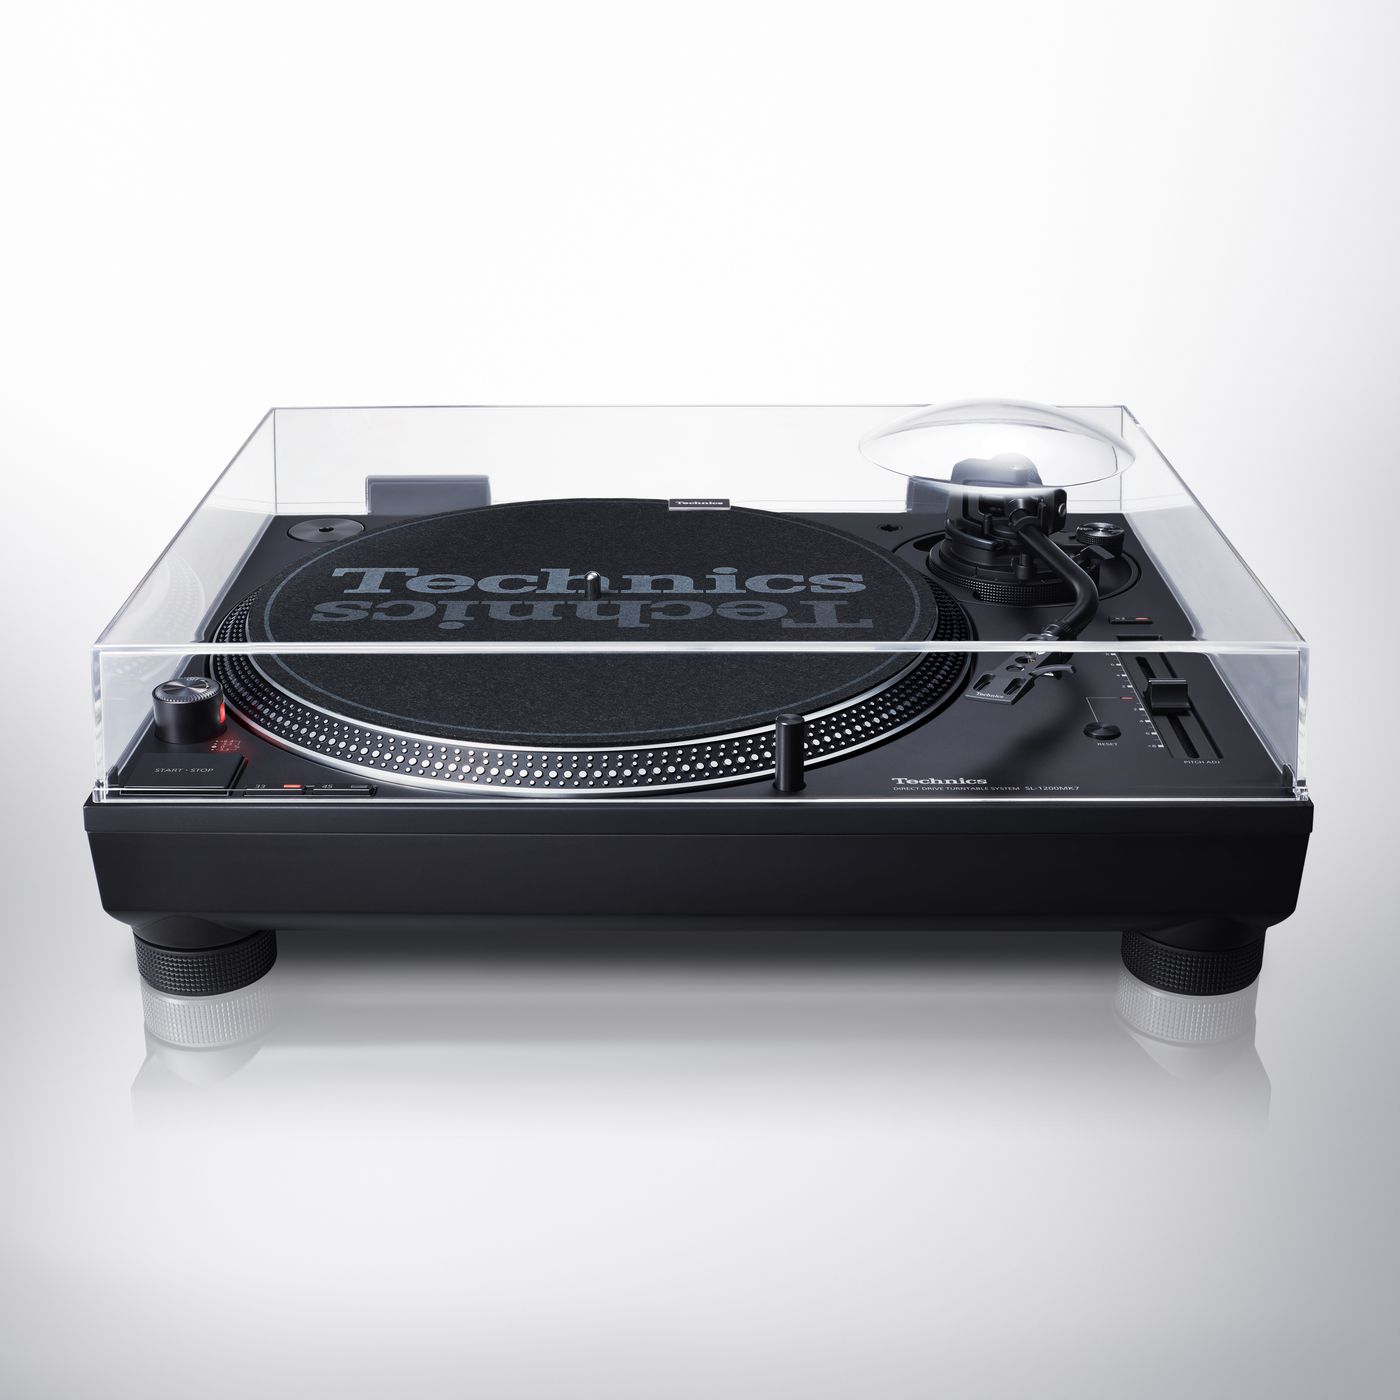 Technics announces a new SL-1200 turntable for DJing - The Verge